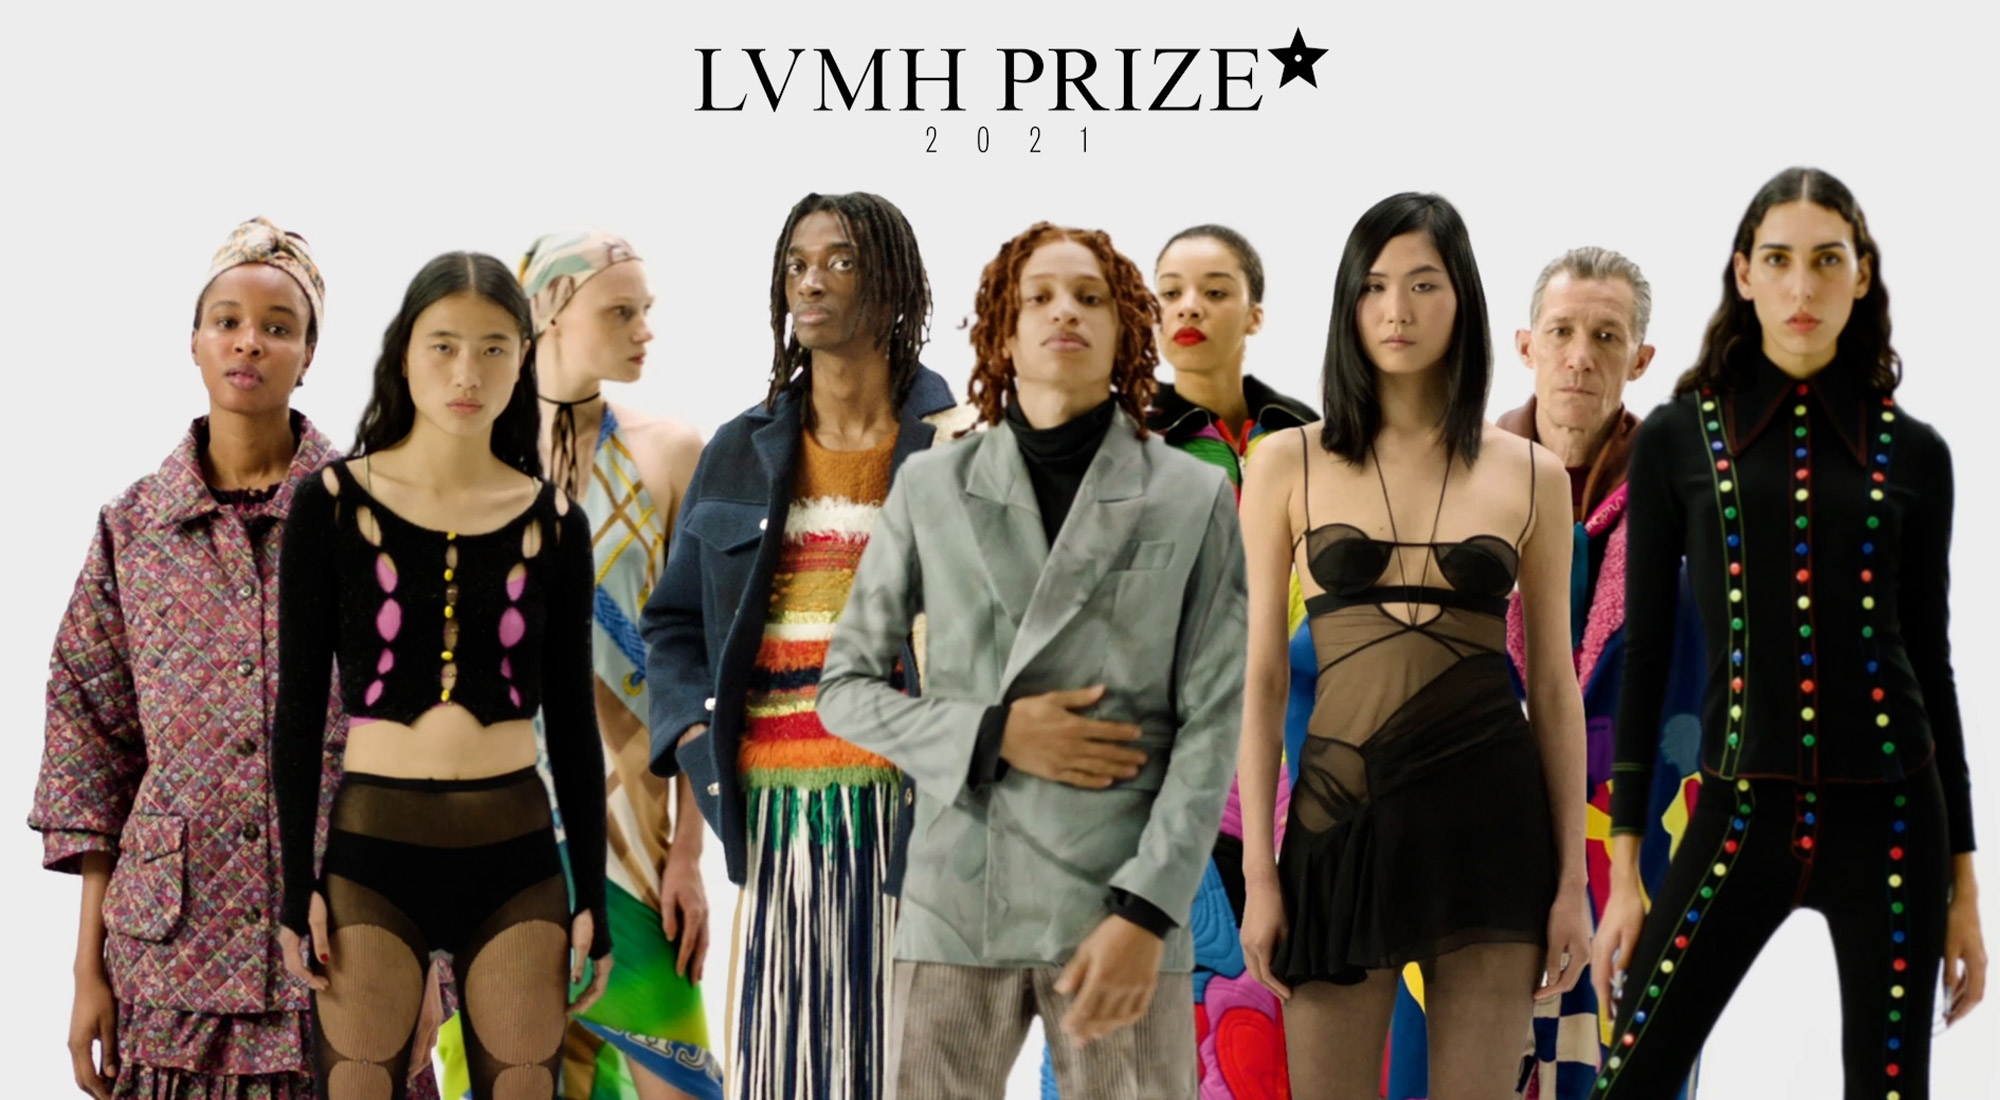 Designer Thebe Magugu wins the 2019 LVMH Prize